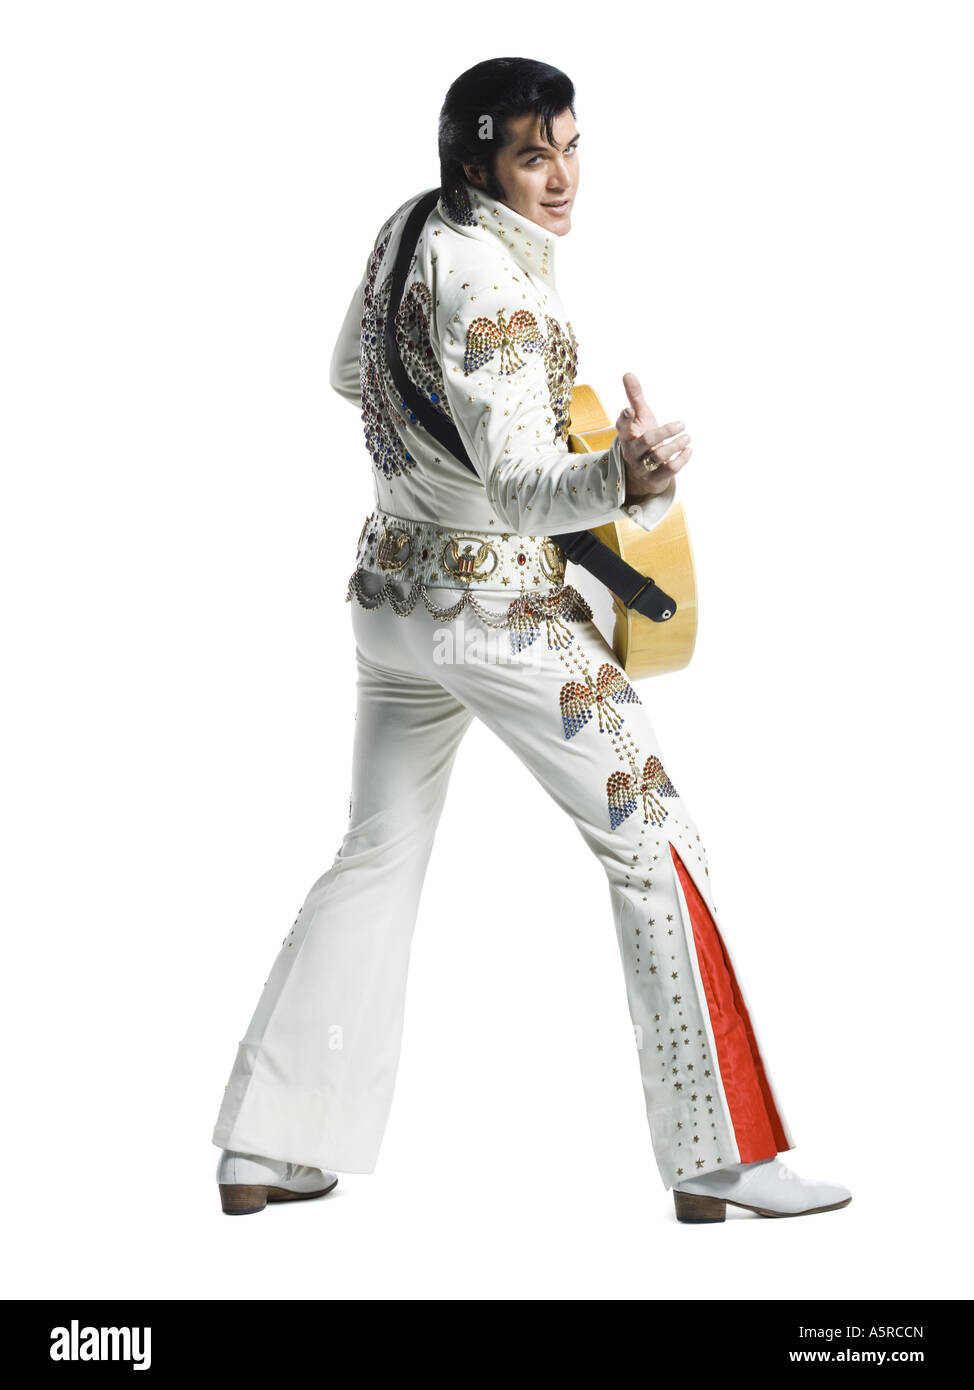 An Elvis impersonator holding a guitar Stock Photo